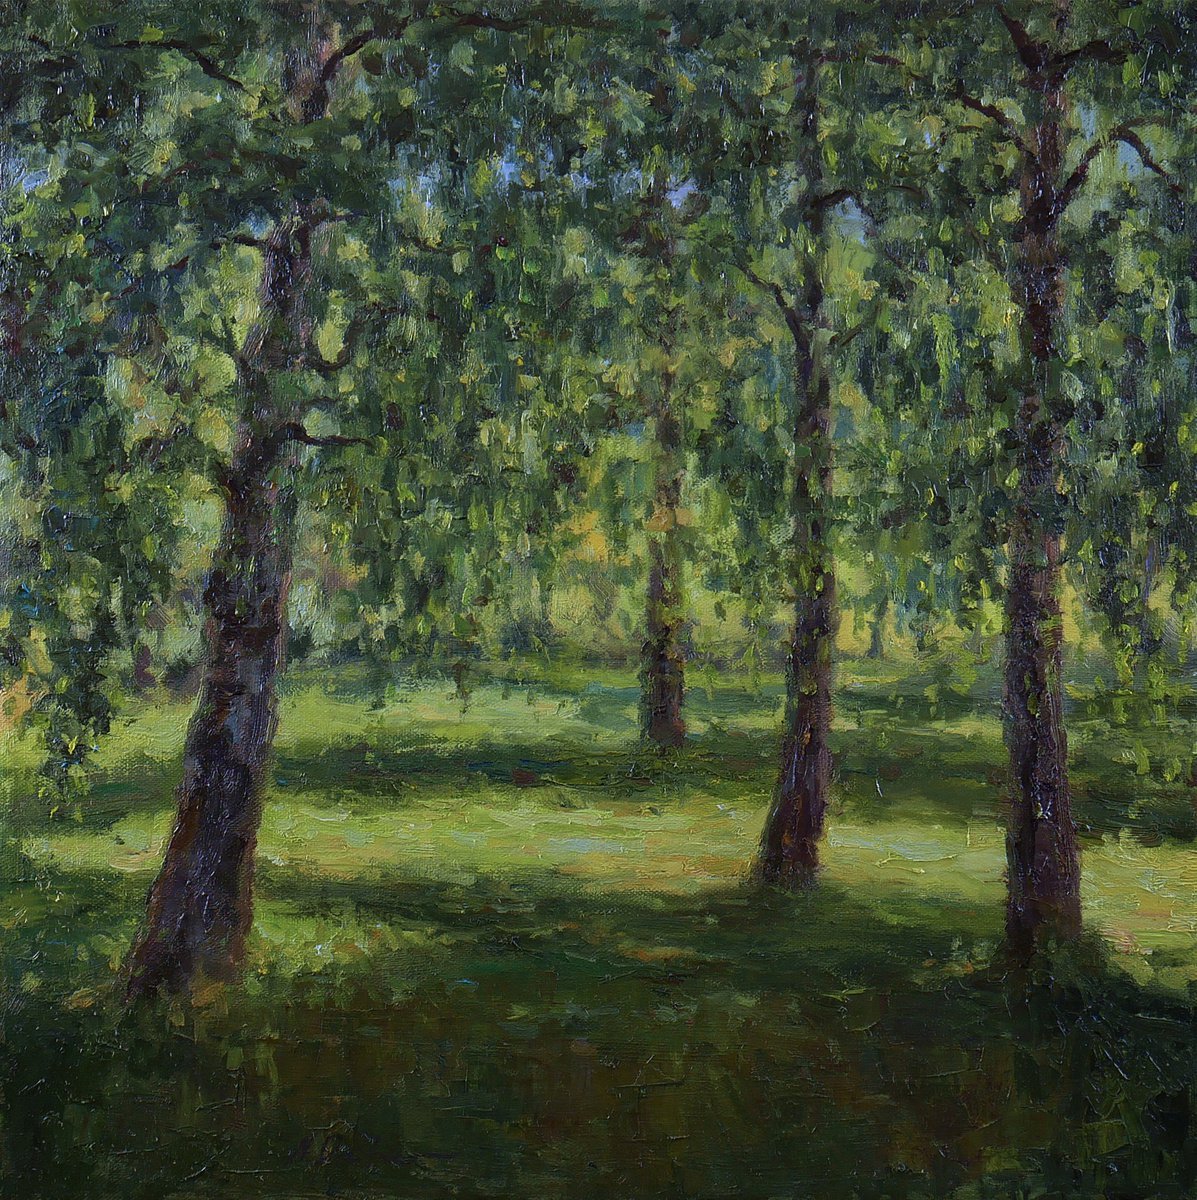 The Birch Forest - summer landscape painting by Nikolay Dmitriev